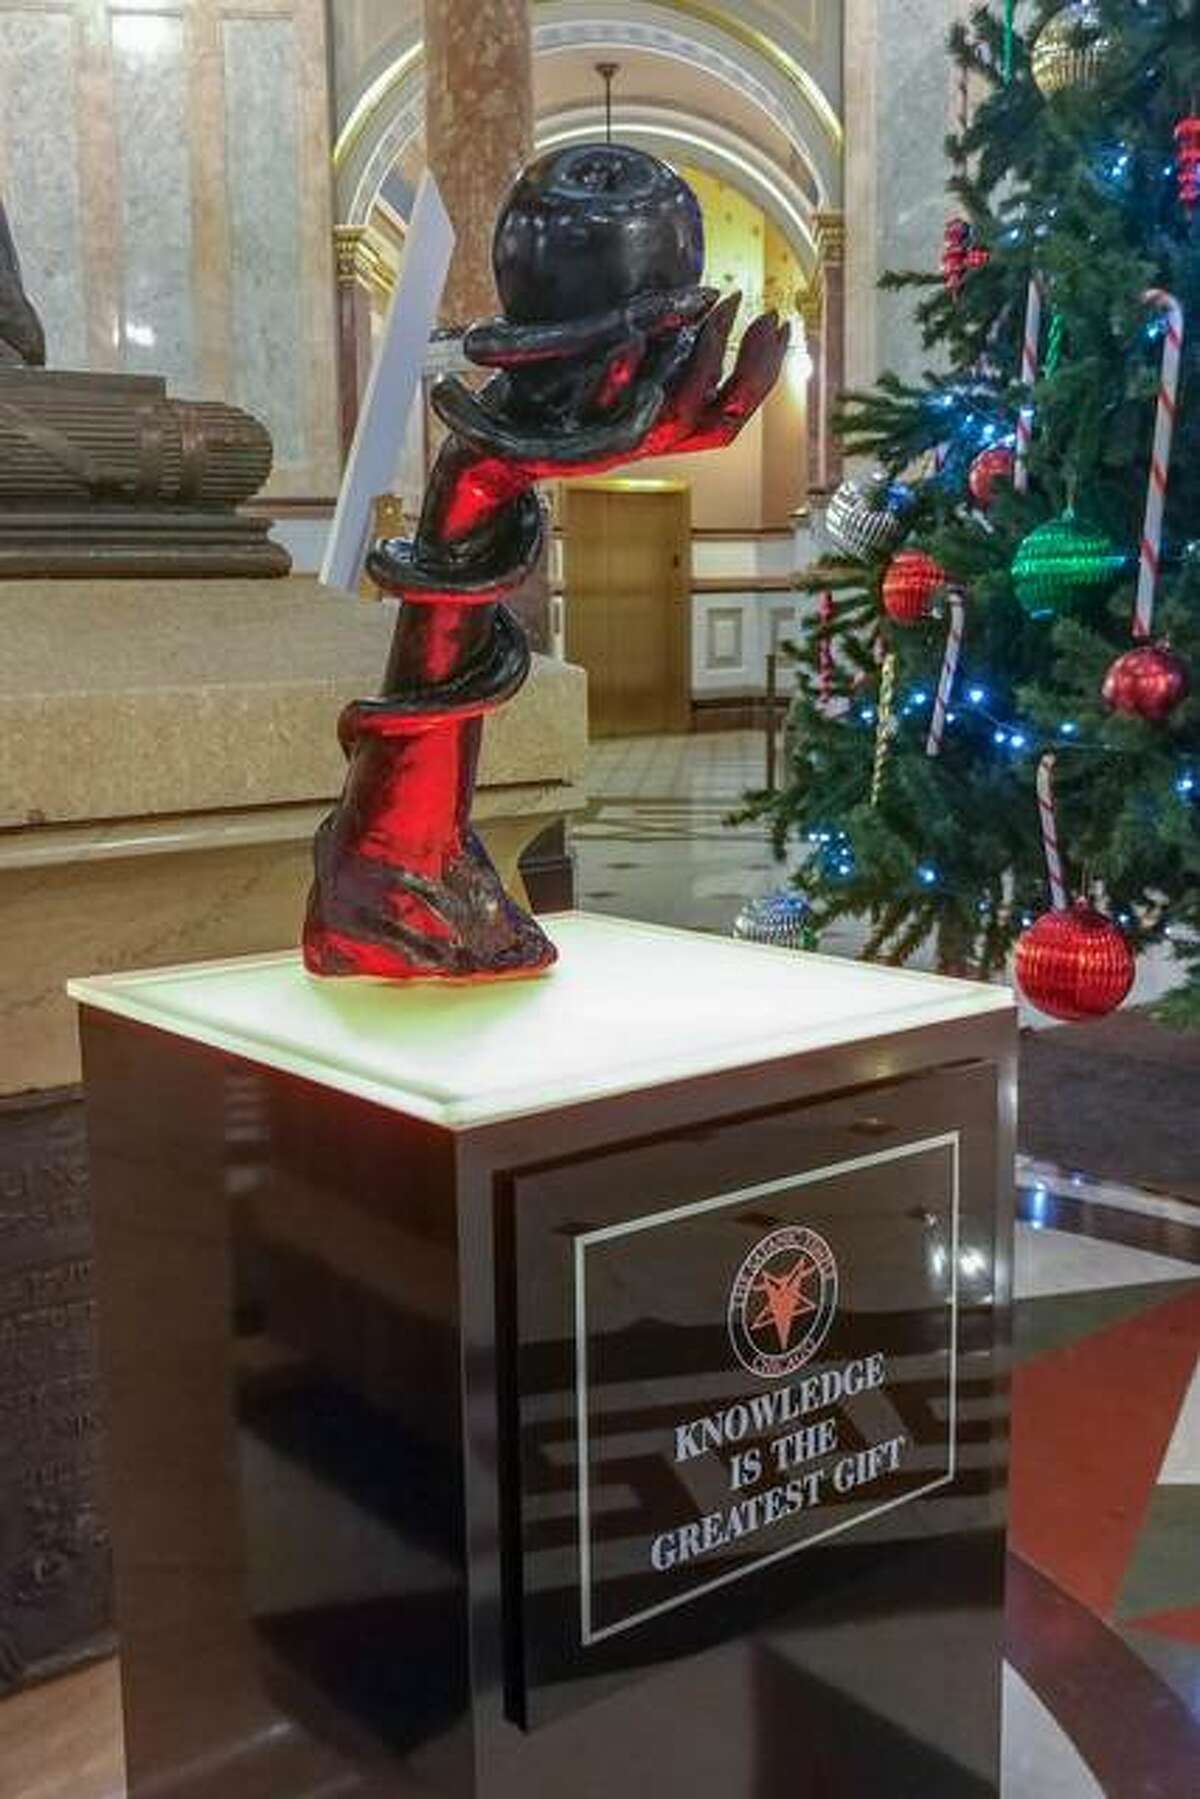 Seasonal decorations are filling the Illinois Capitol rotunda, including a satanic sculpture near a traditional Christmas tree. The winter displays, installed for 30 days, are protected by the First Amendment of the U.S. Constitution, so long as the displays are not paid for by taxpayer dollars.